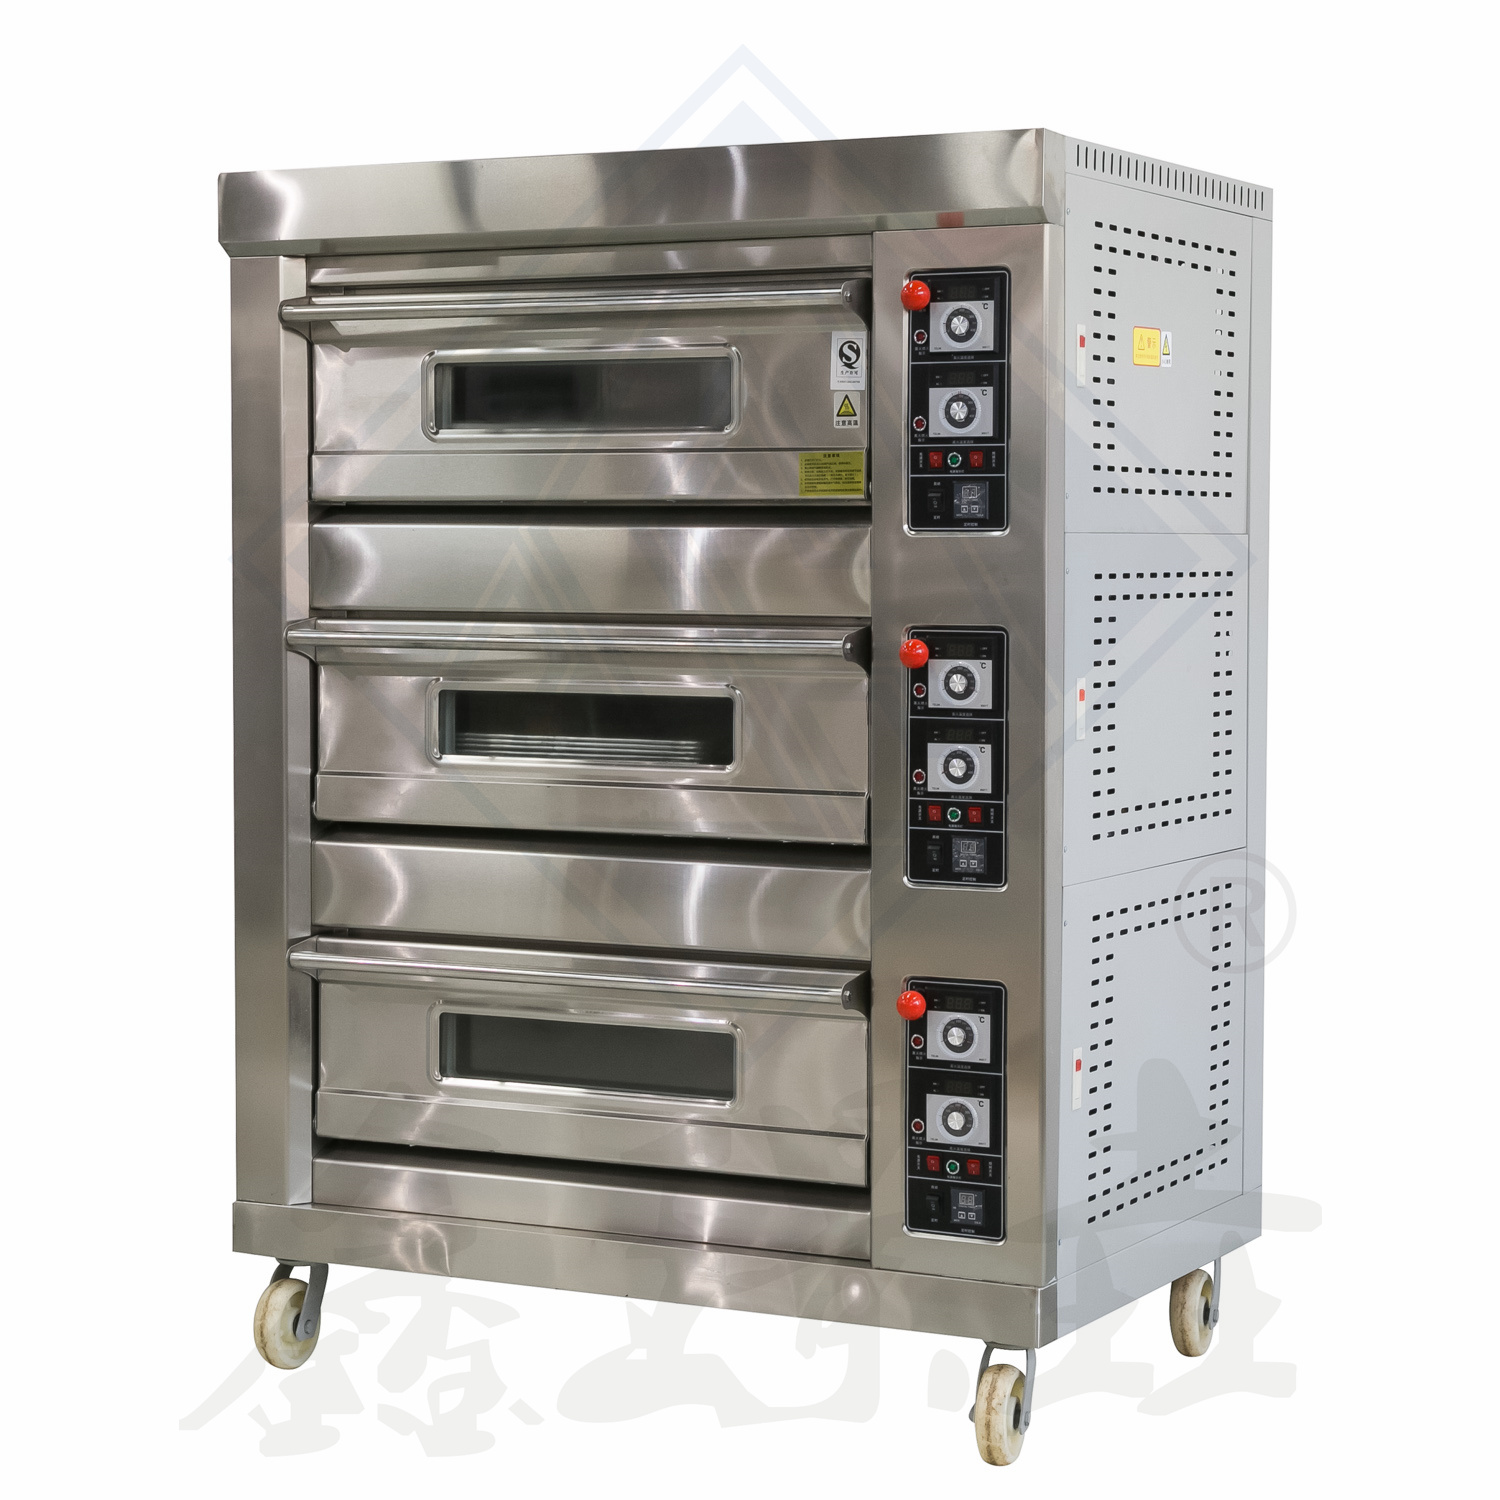 Multifunction electric bakery baking deck oven commercial baking oven for bread and cake gas deck oven